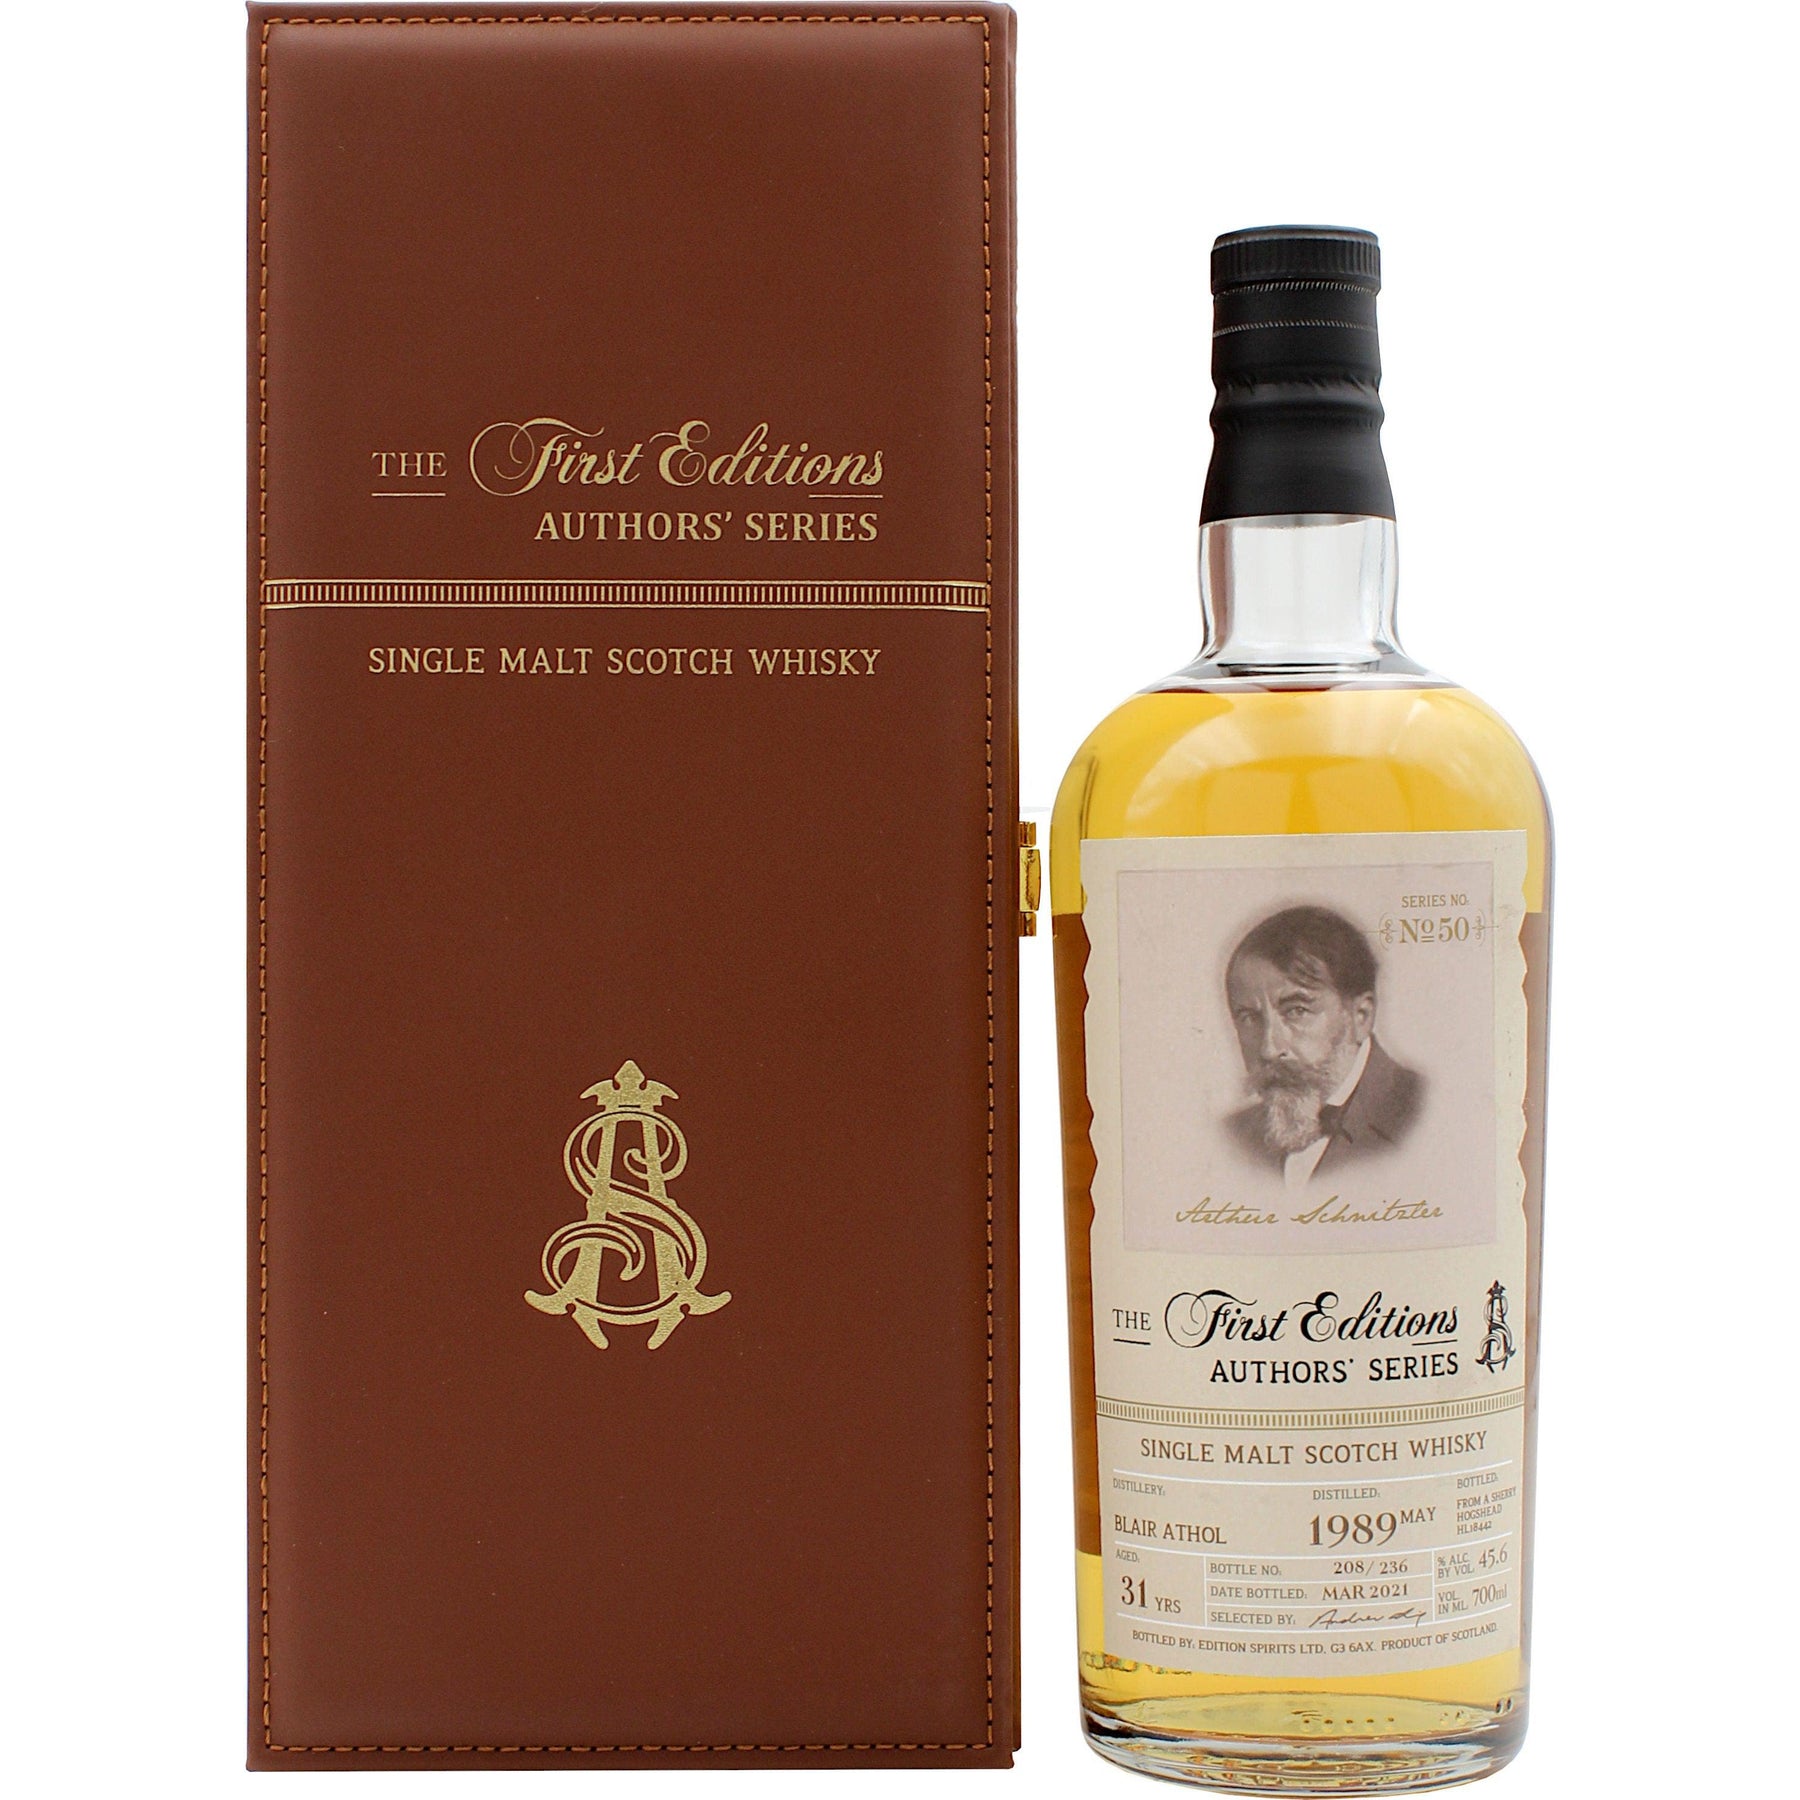 Hunter Laing & Co. Blair Athol 31 Years 1989 Author Series Sherry Cask First Editions Limited Edition Whisky 700ml